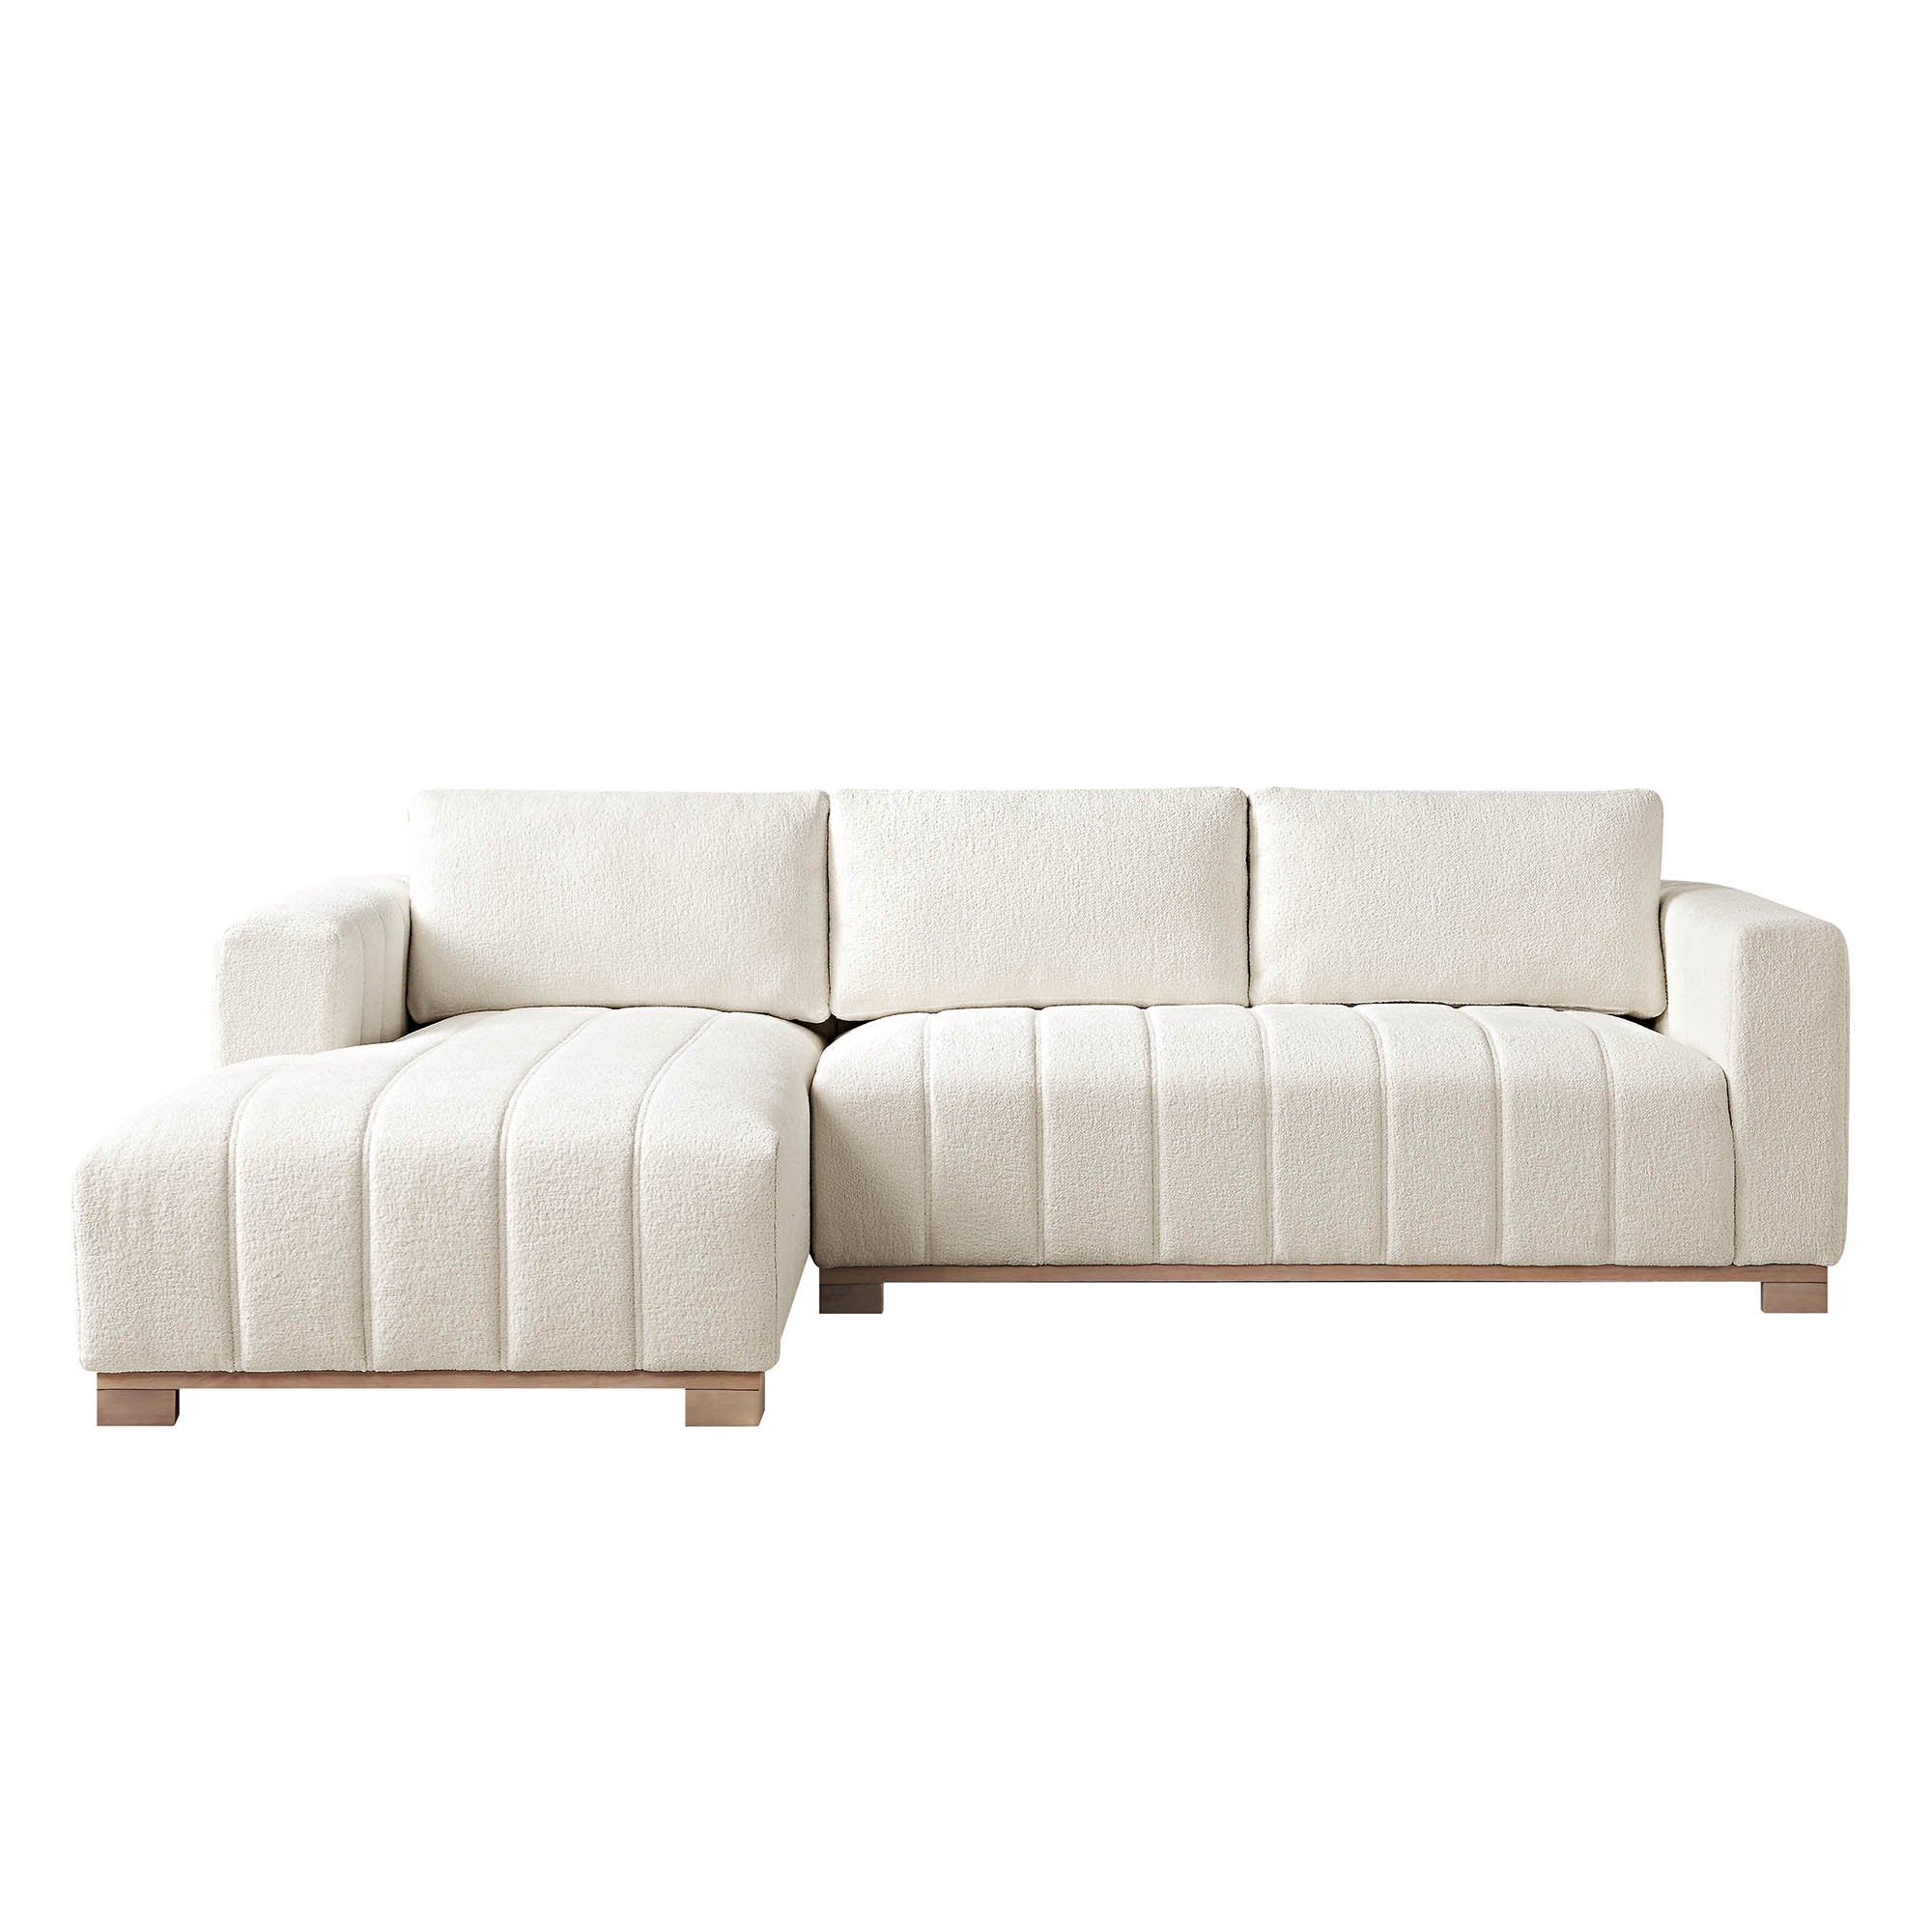 Belsize Beige Boucle Sofa with Wooden Base, Large Chaise Left Hand